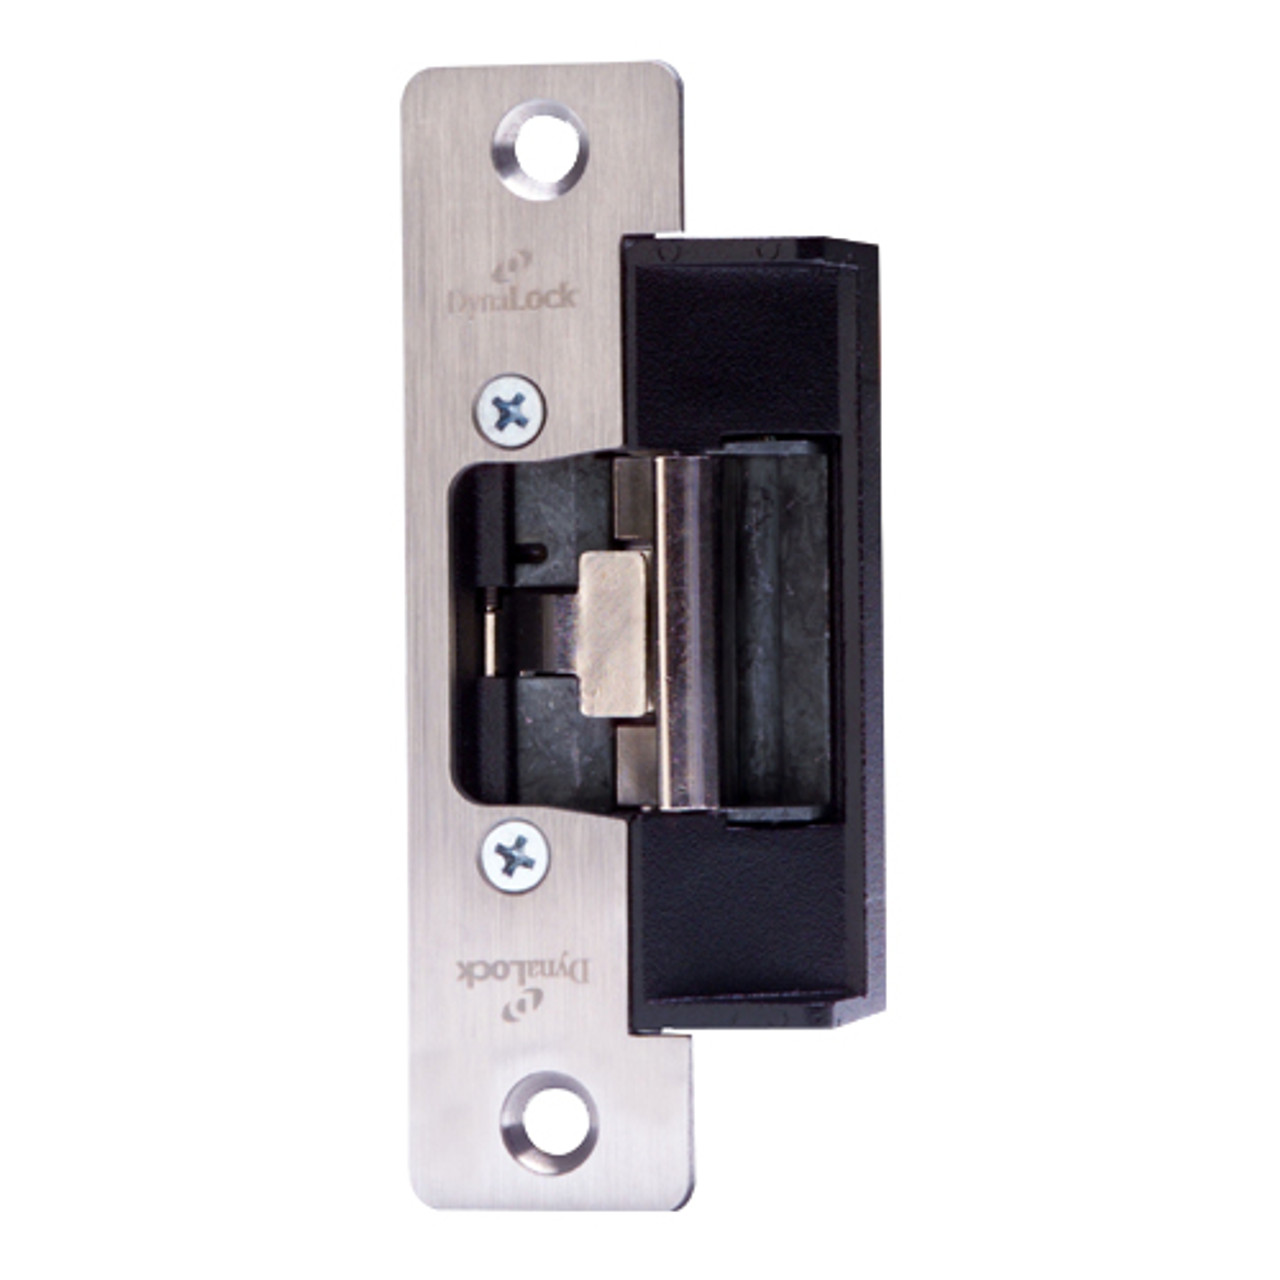 1604L-US32 DynaLock 1600 Series Electric Strike for Low Profile in Bright Stainless Steel